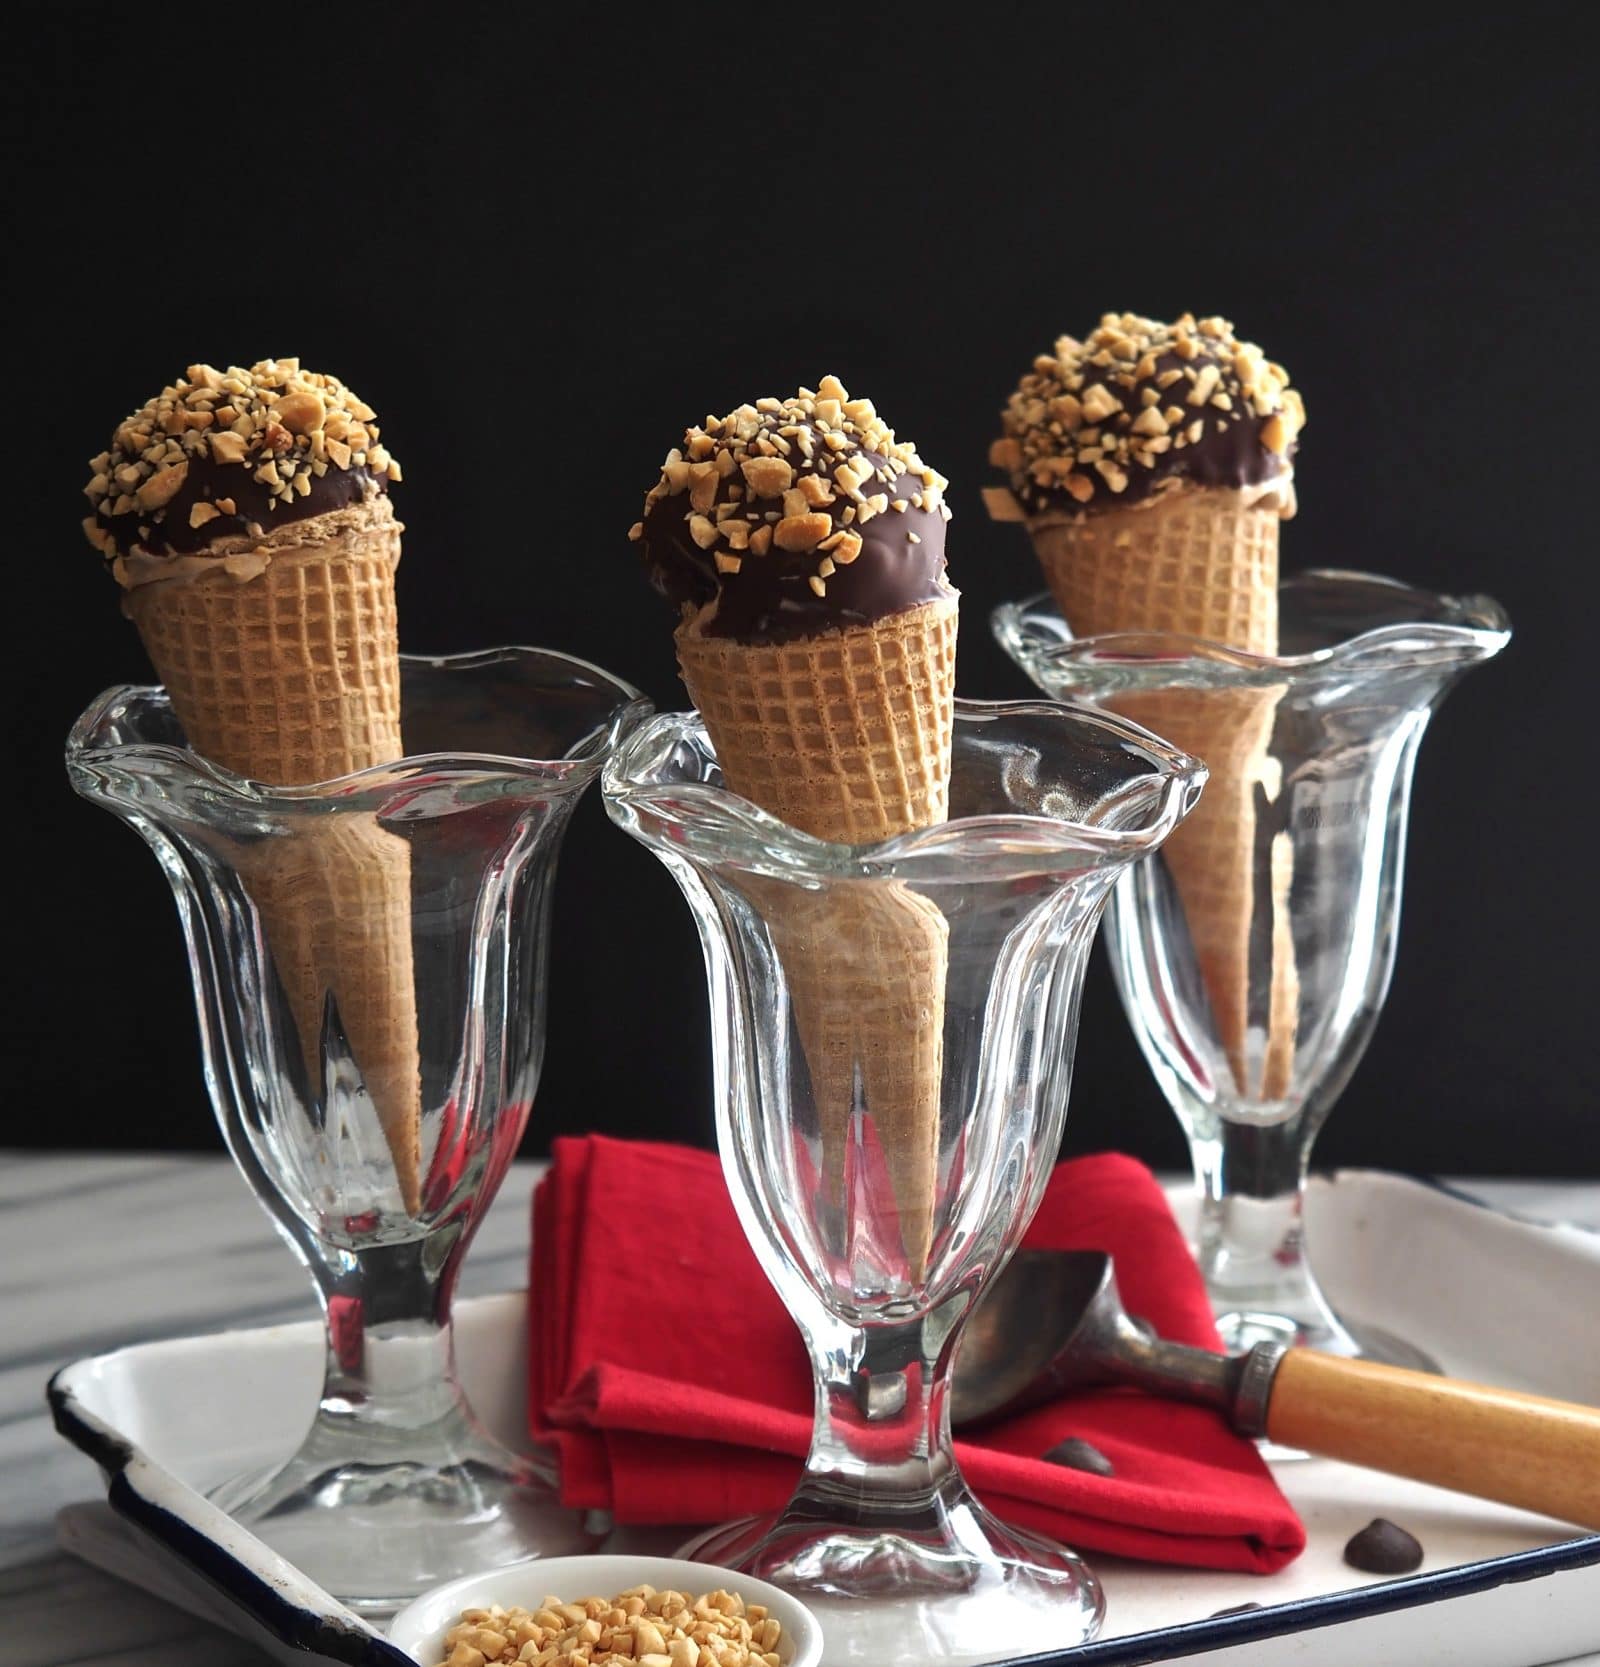 Homemade Drumsticks bring out the "kid" in each of us-just Imagine the ice cream truck jingle and waiting at the curb for your very special ice cream treat.